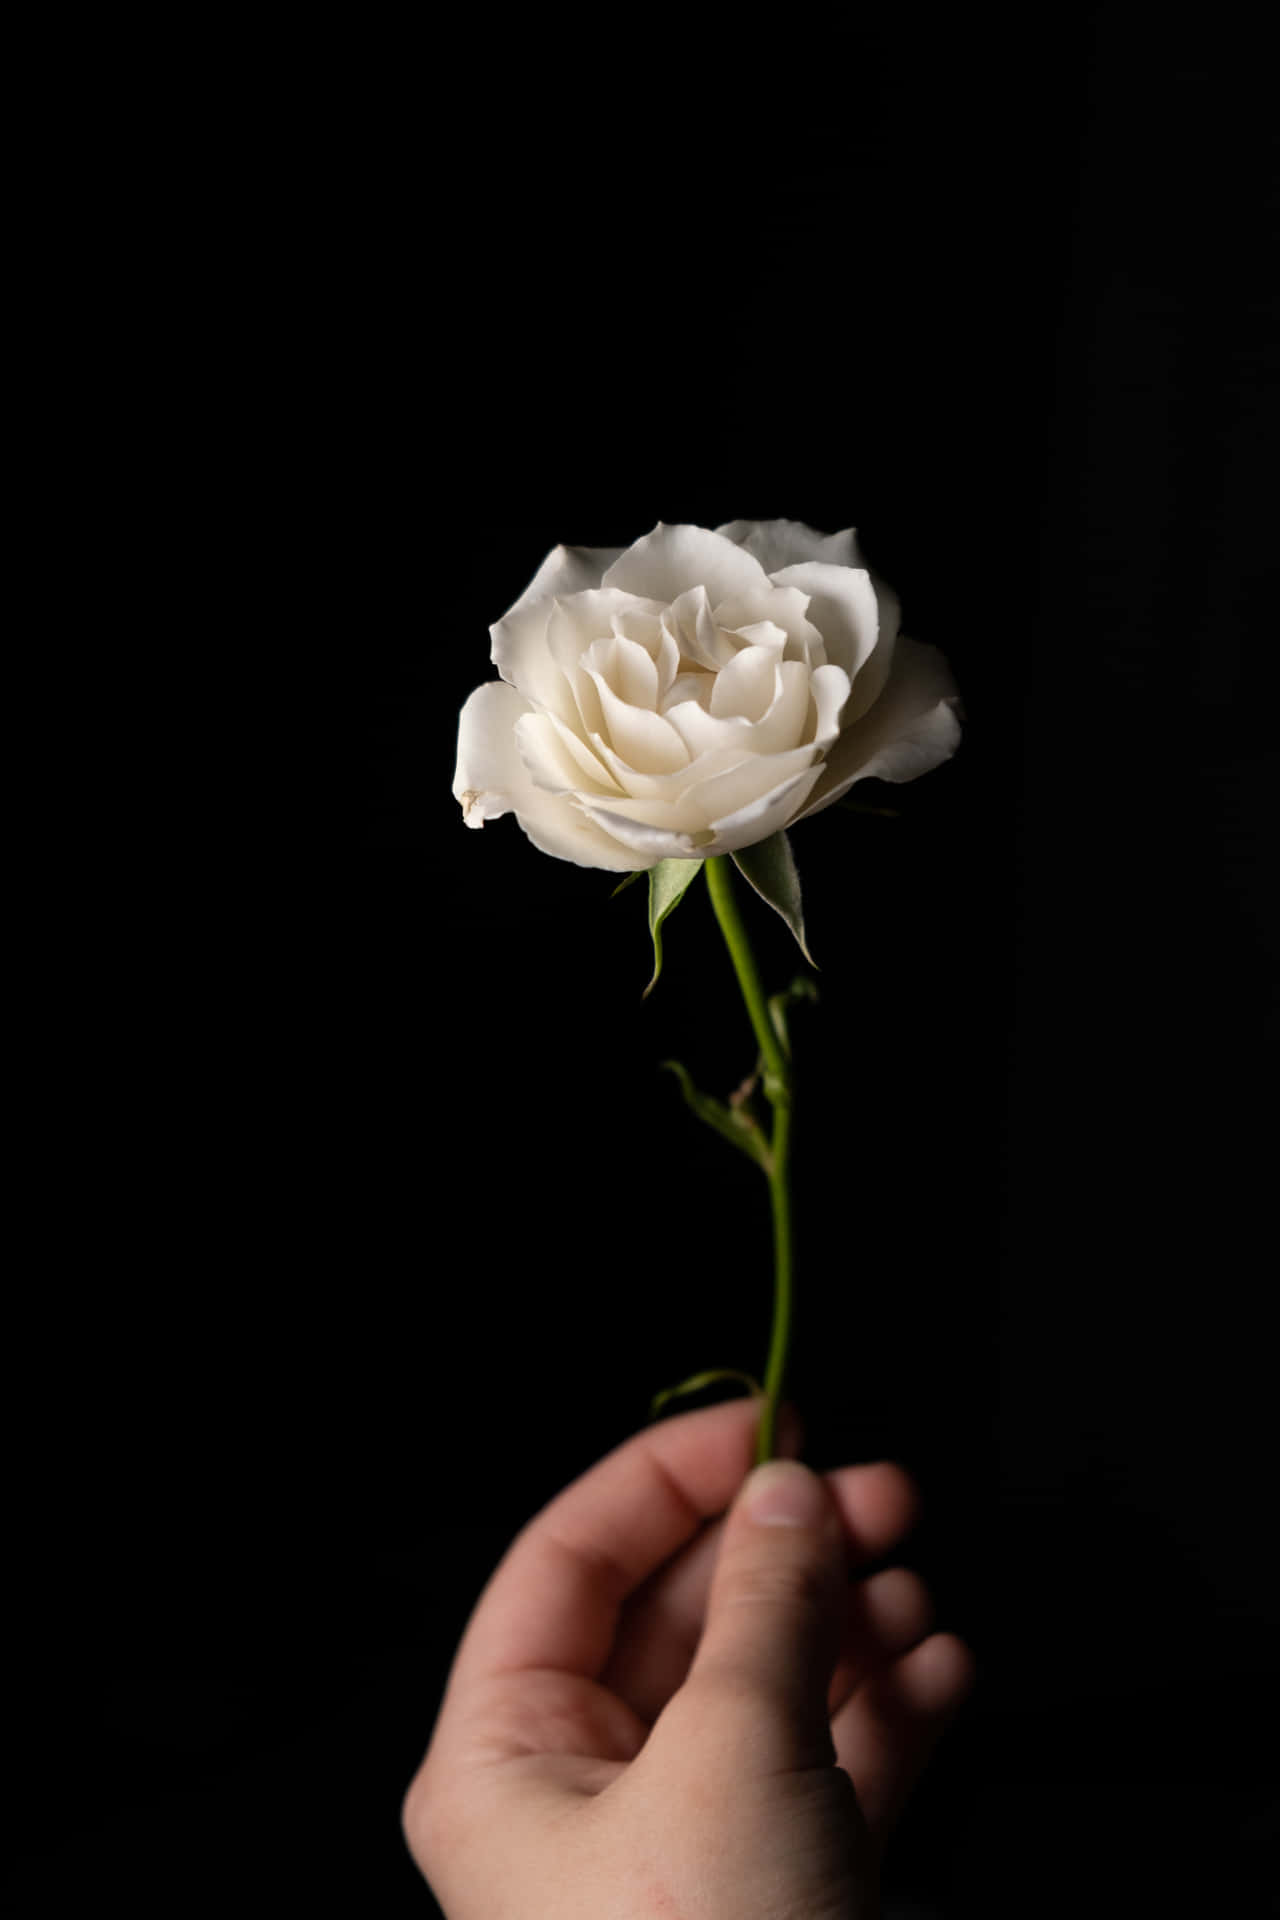 A white rose with delicate petals stands out against a brush of soft pink, creating a stunning contrast.